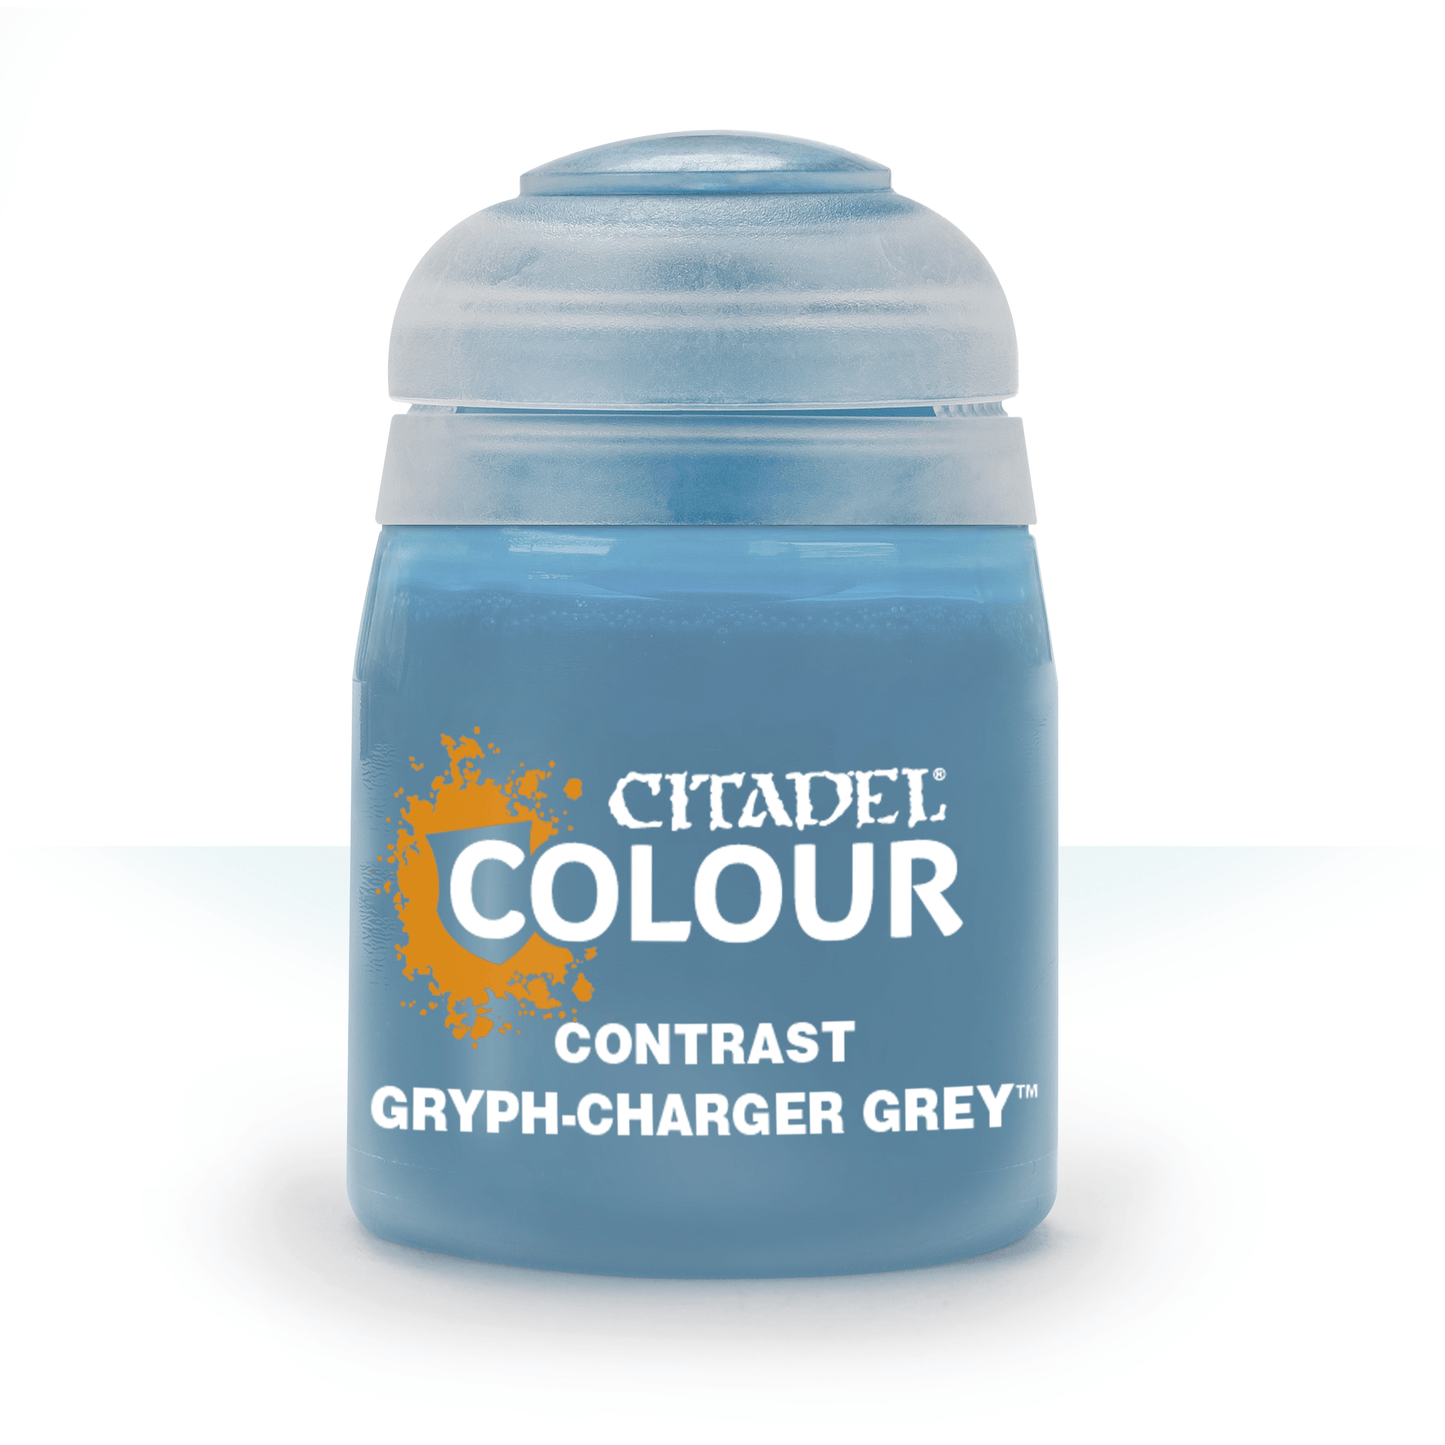 Gryph-Charger Grey - Contrast